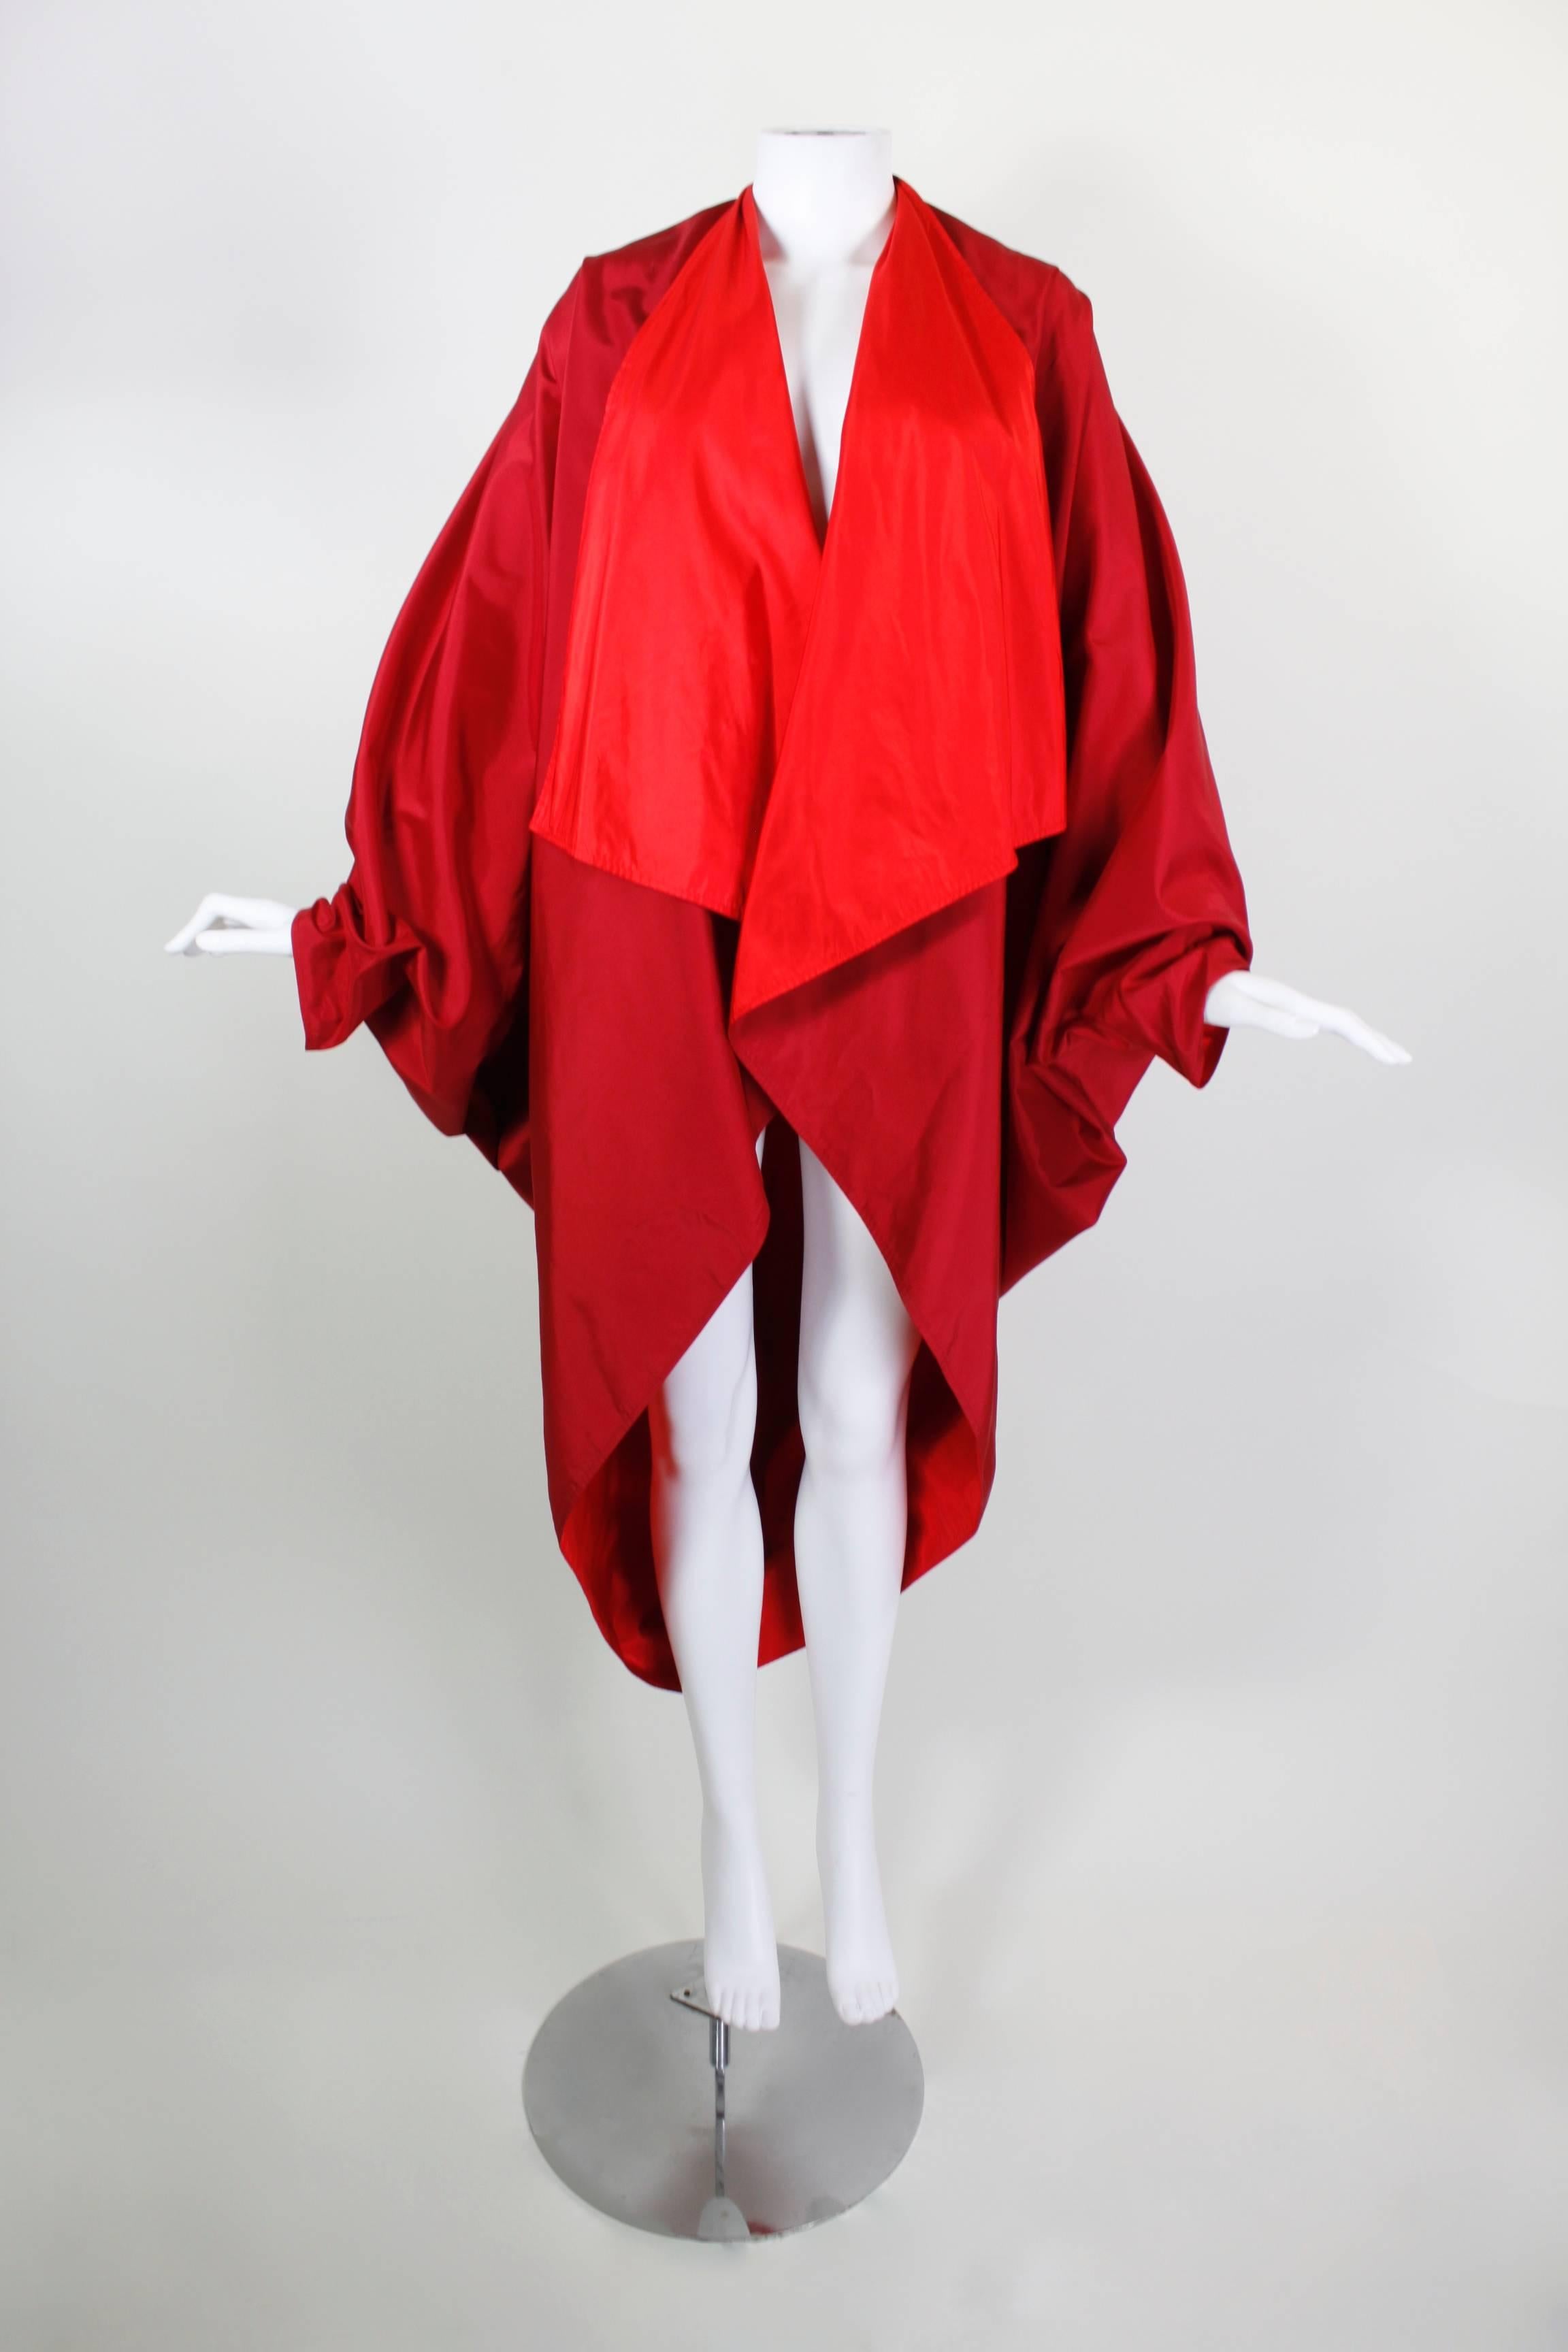 1980s Reversible Colorblock Cocoon Cape

One size fits most.